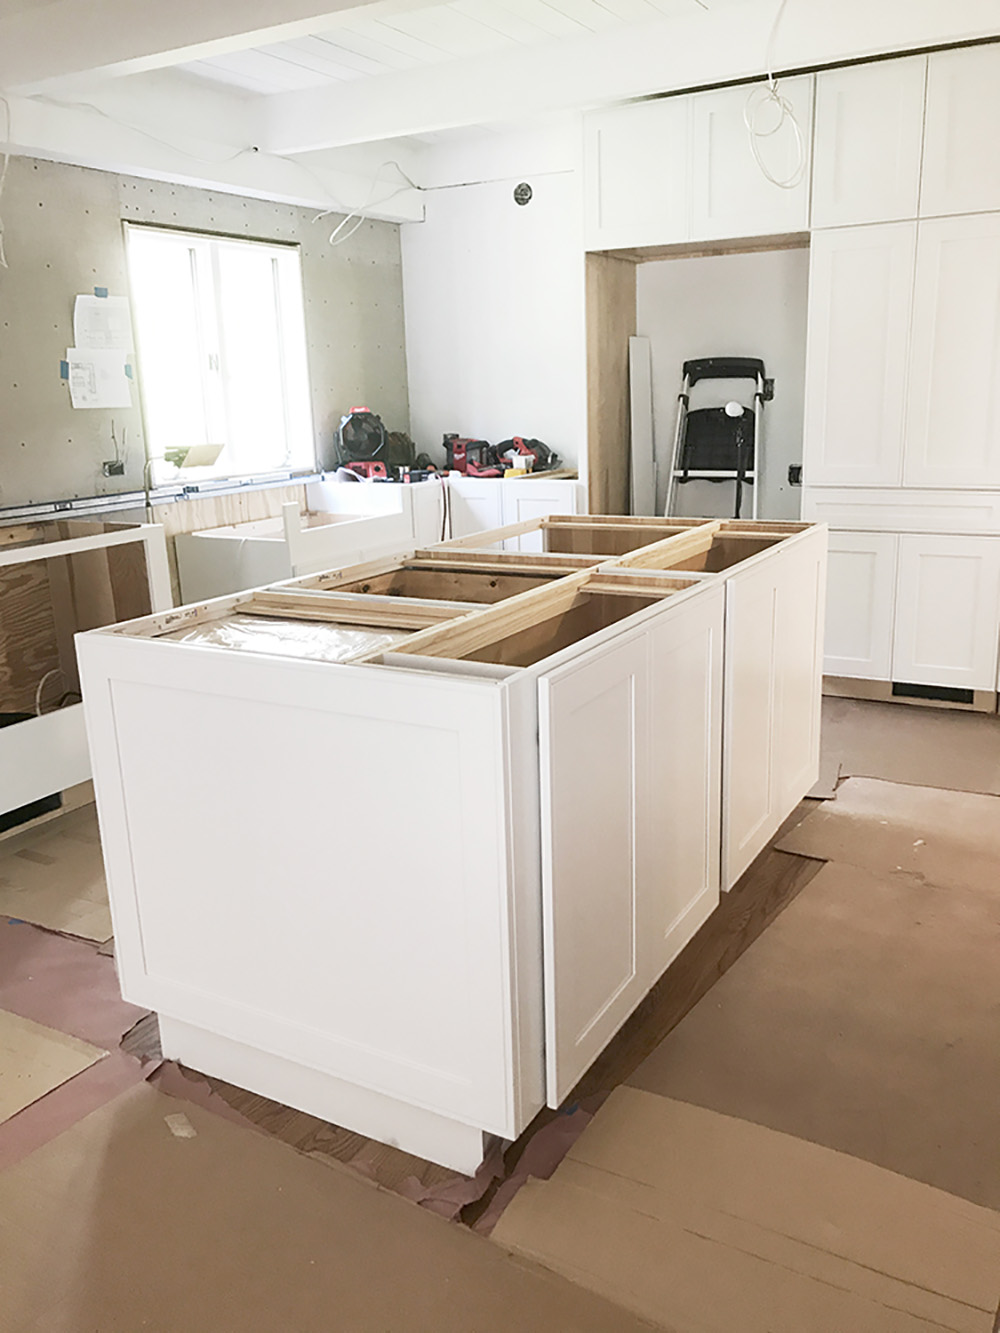 A kitchen with white cabinets partially installed.